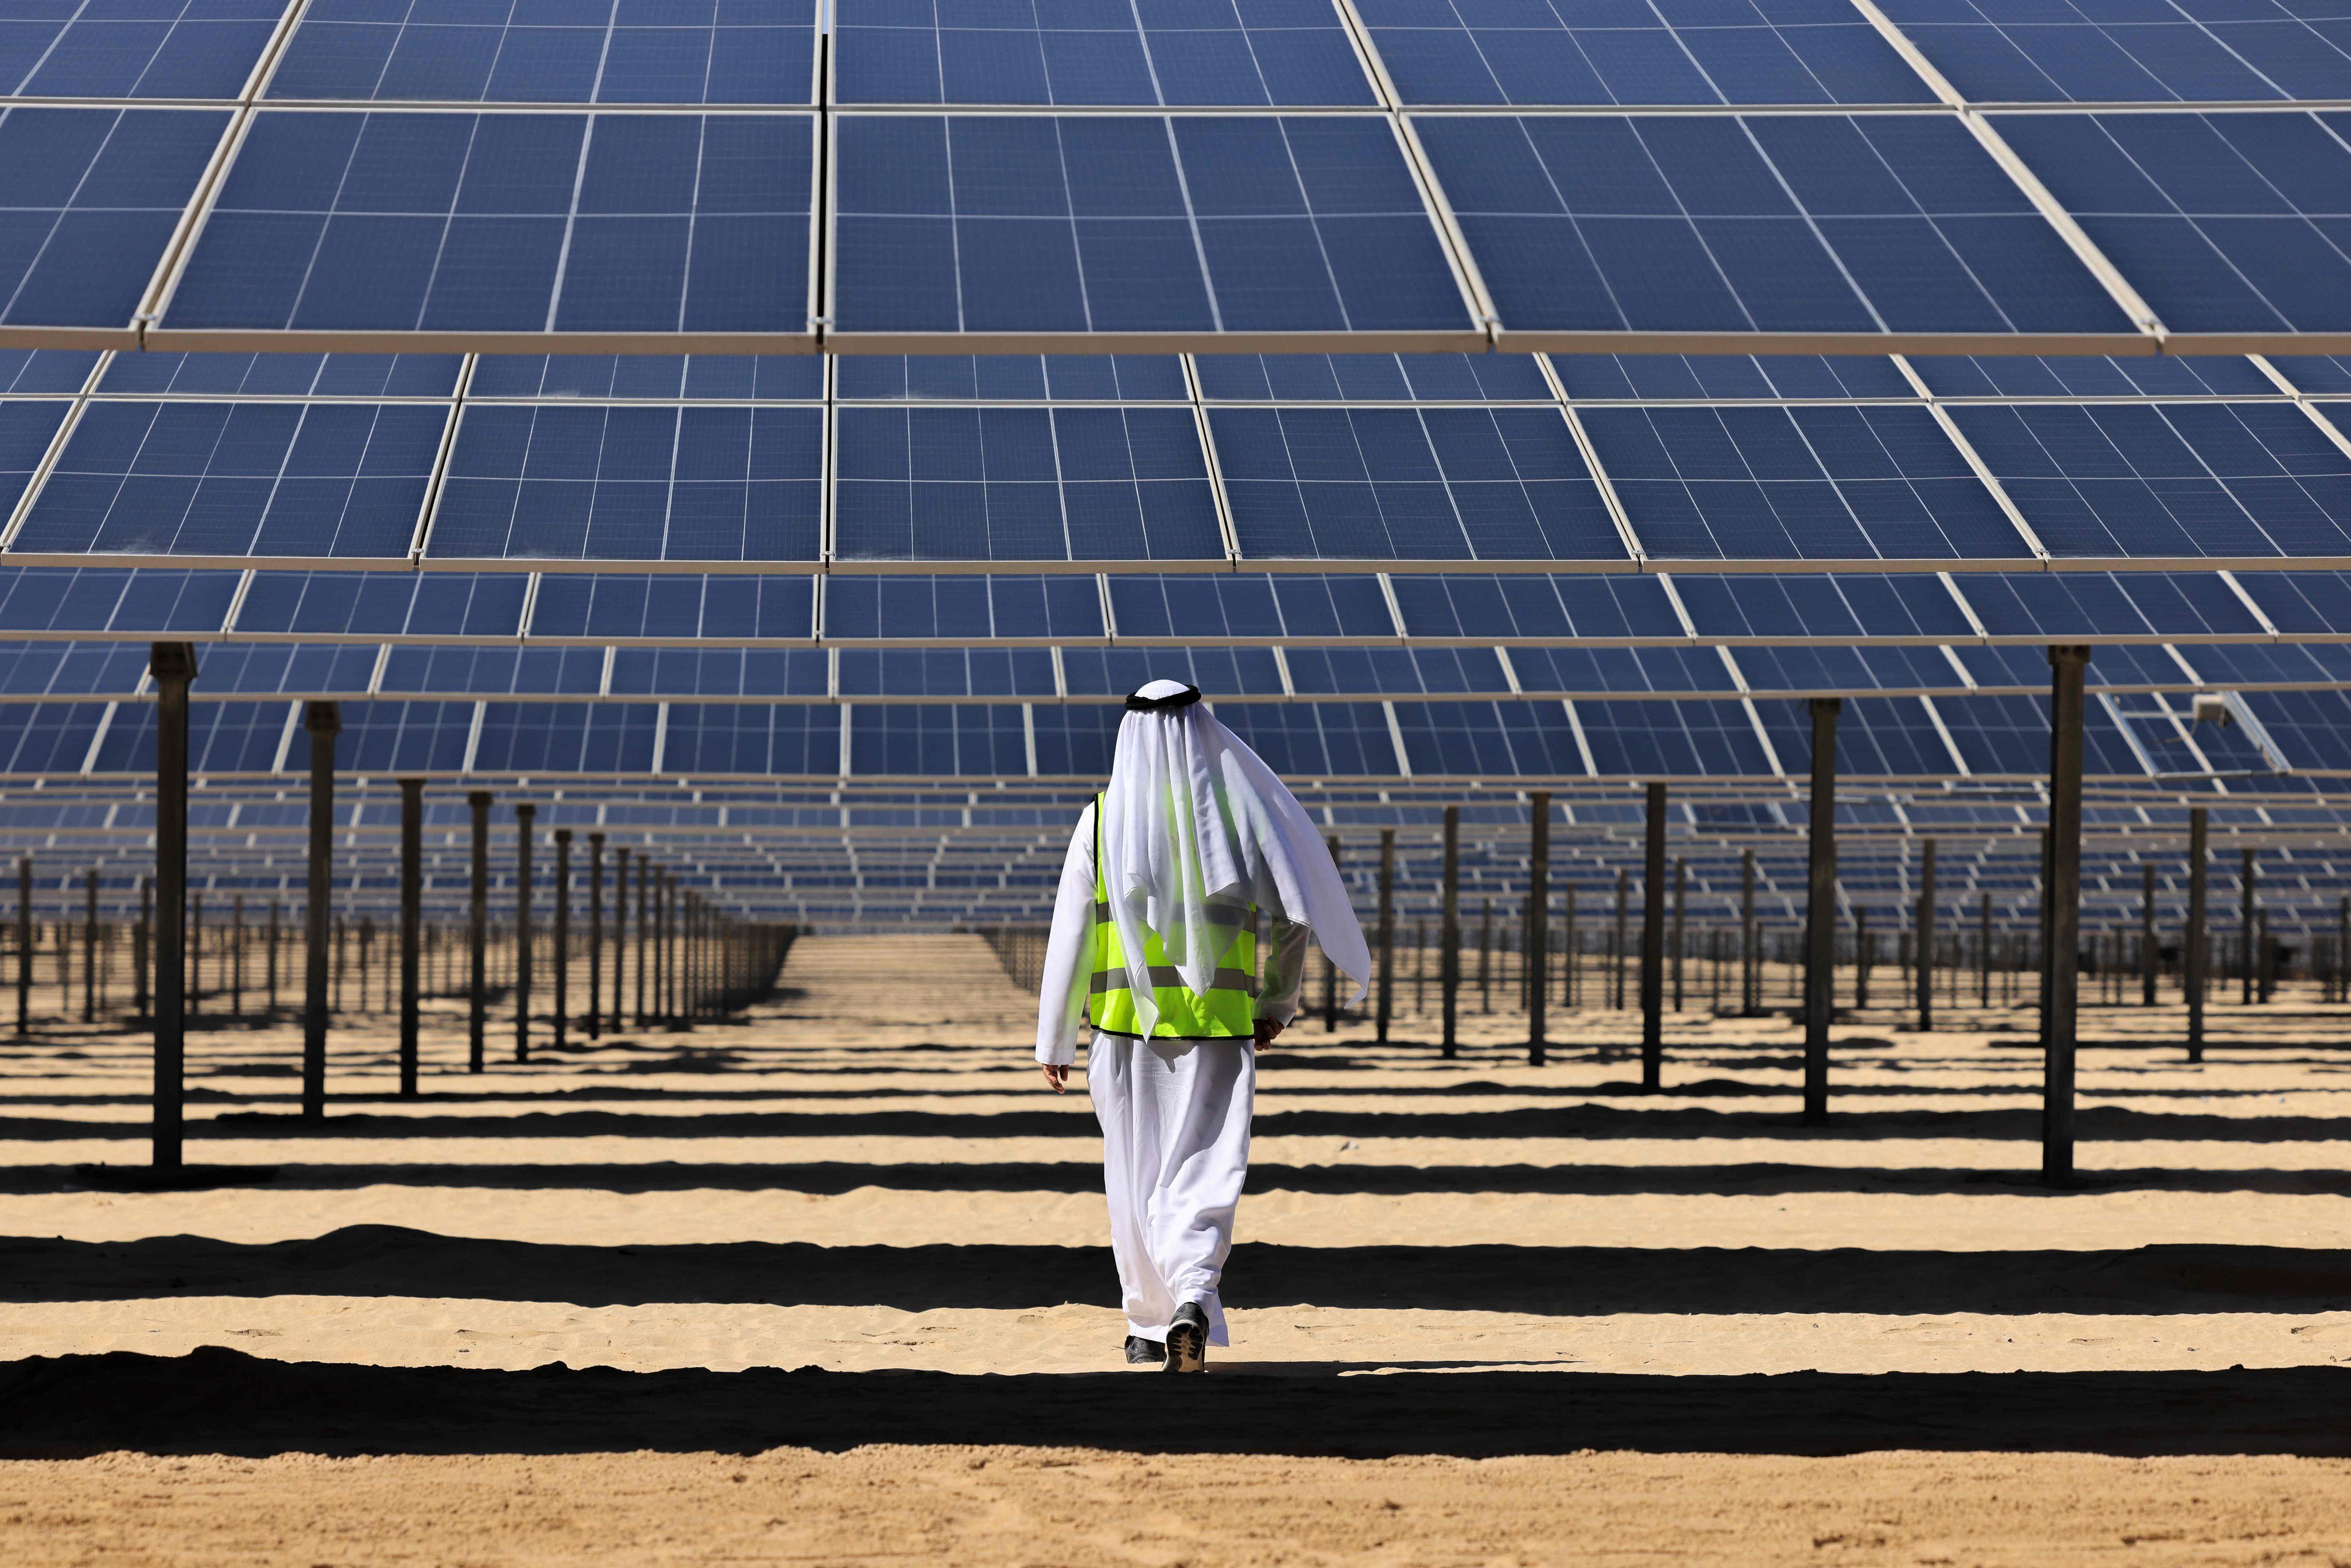 The China-built Al Dhafra solar plant outside Abu Dhabi has produced 3.6 billion kilowatt-hours of clean electricity since it started full operations in April. Photo: AFP